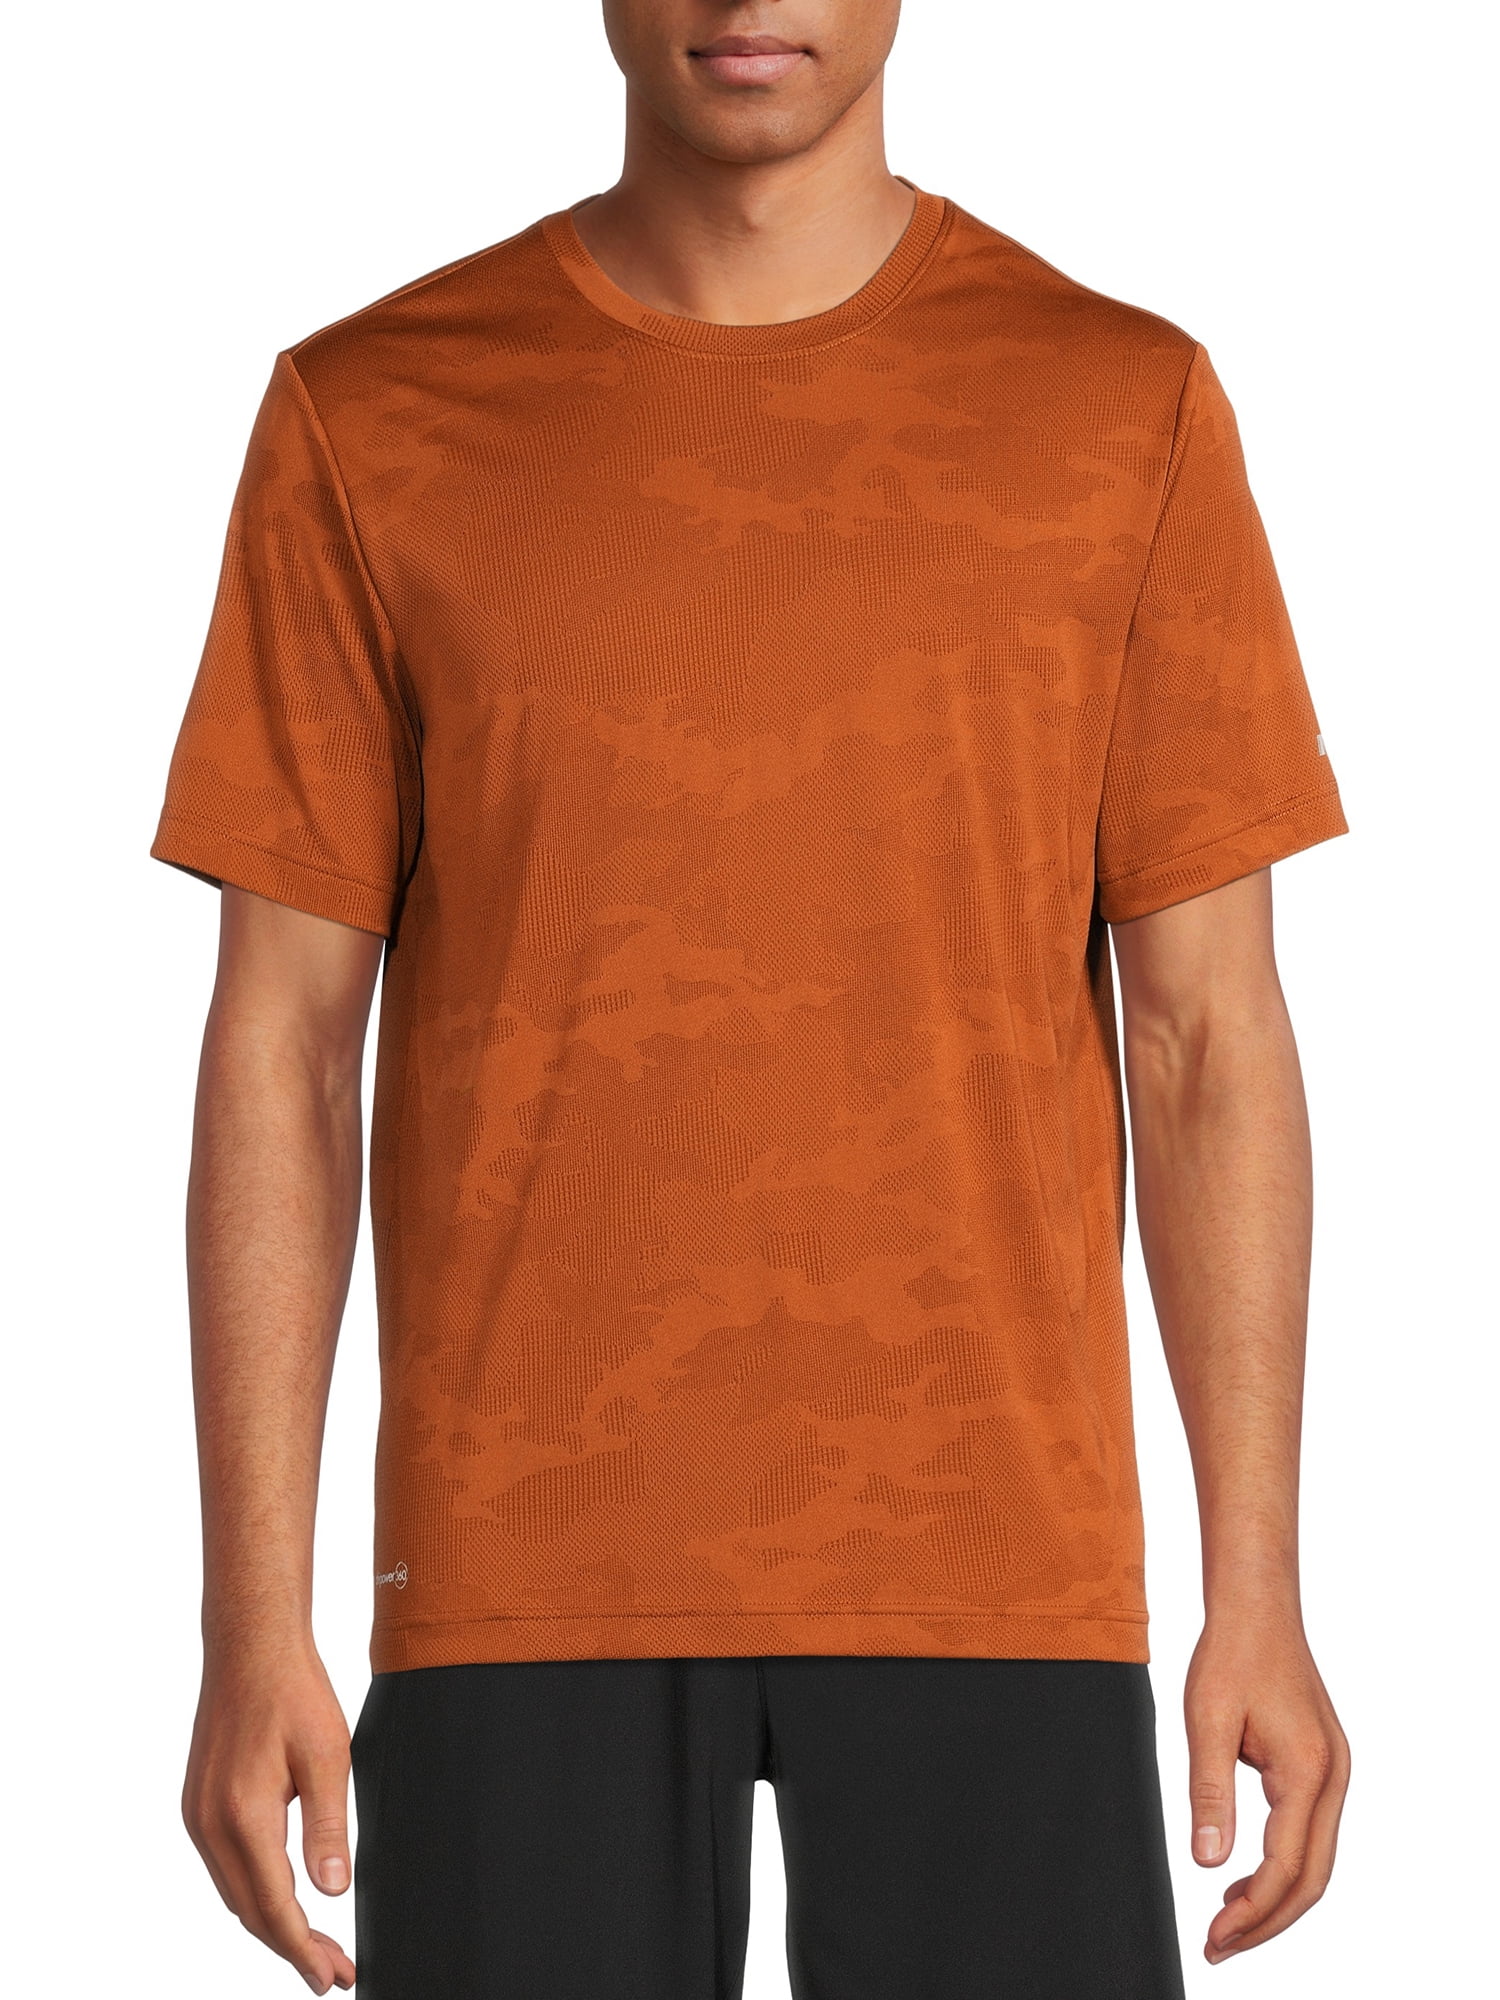 Russell Men's and Big Men's Active Jacquard T-Shirt with Short Sleeves,  Sizes up to 5XL 